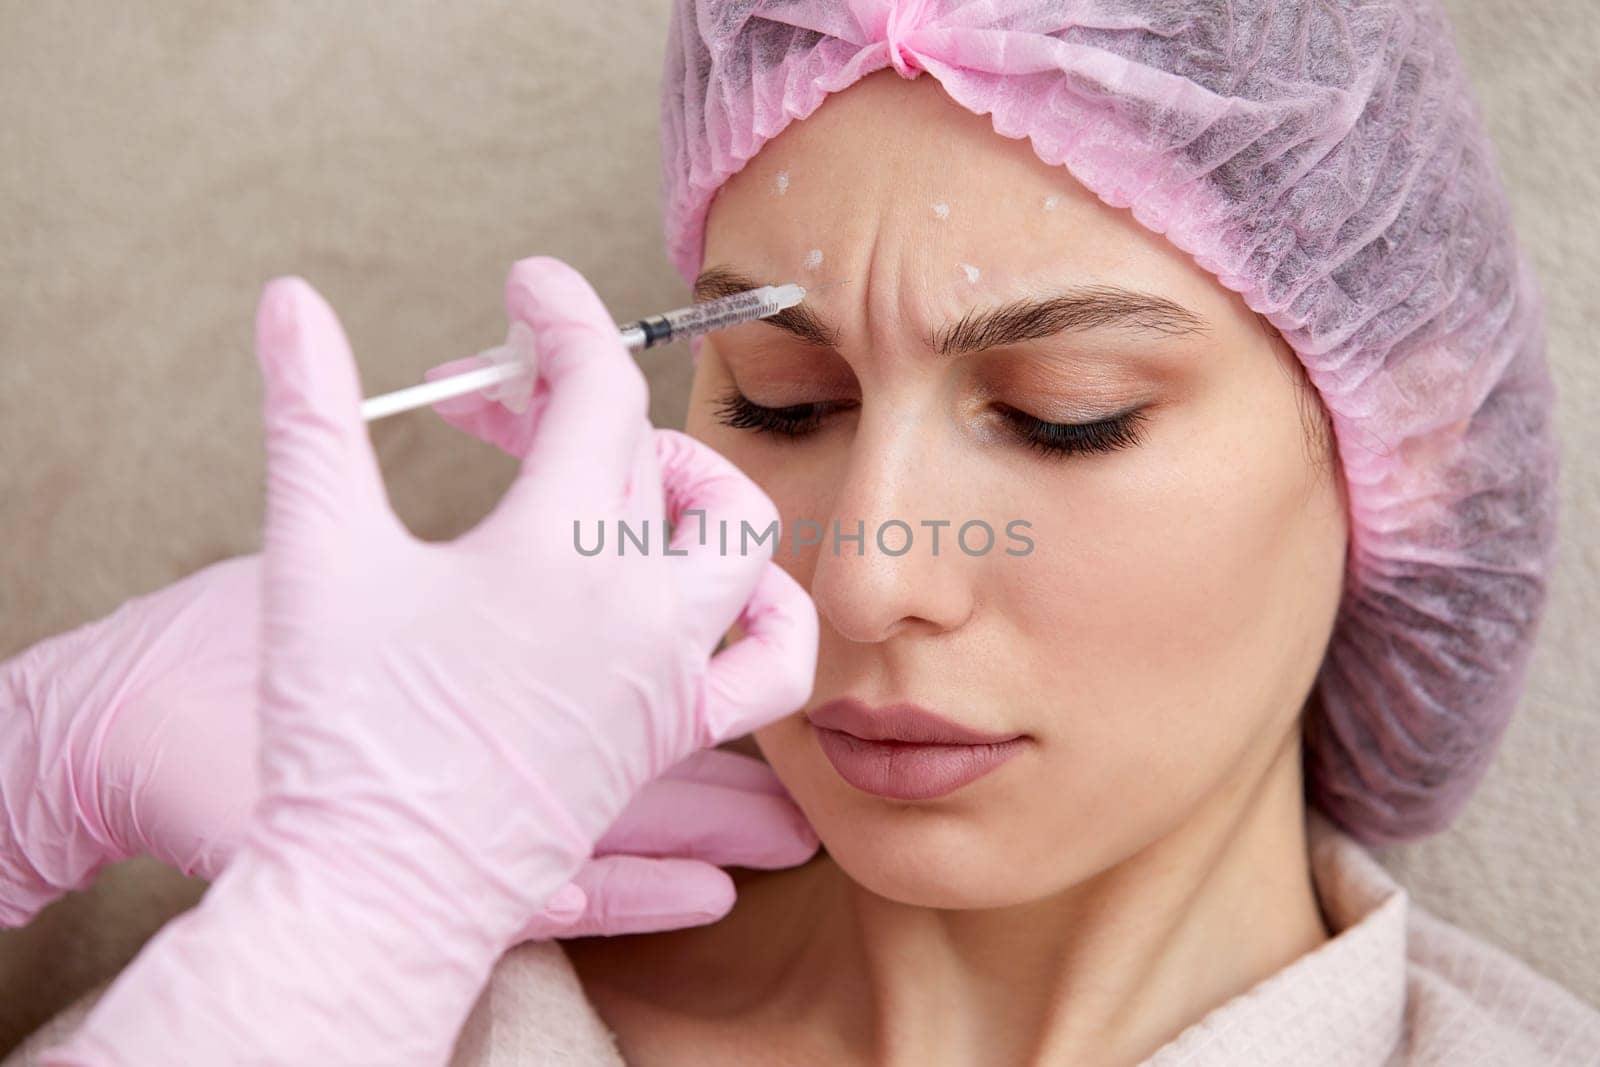 Cosmetologist performs the lift procedure by injecting beauty injections. Doctor injecting hyaluronic acid as facial rejuvenation treatment by Mariakray